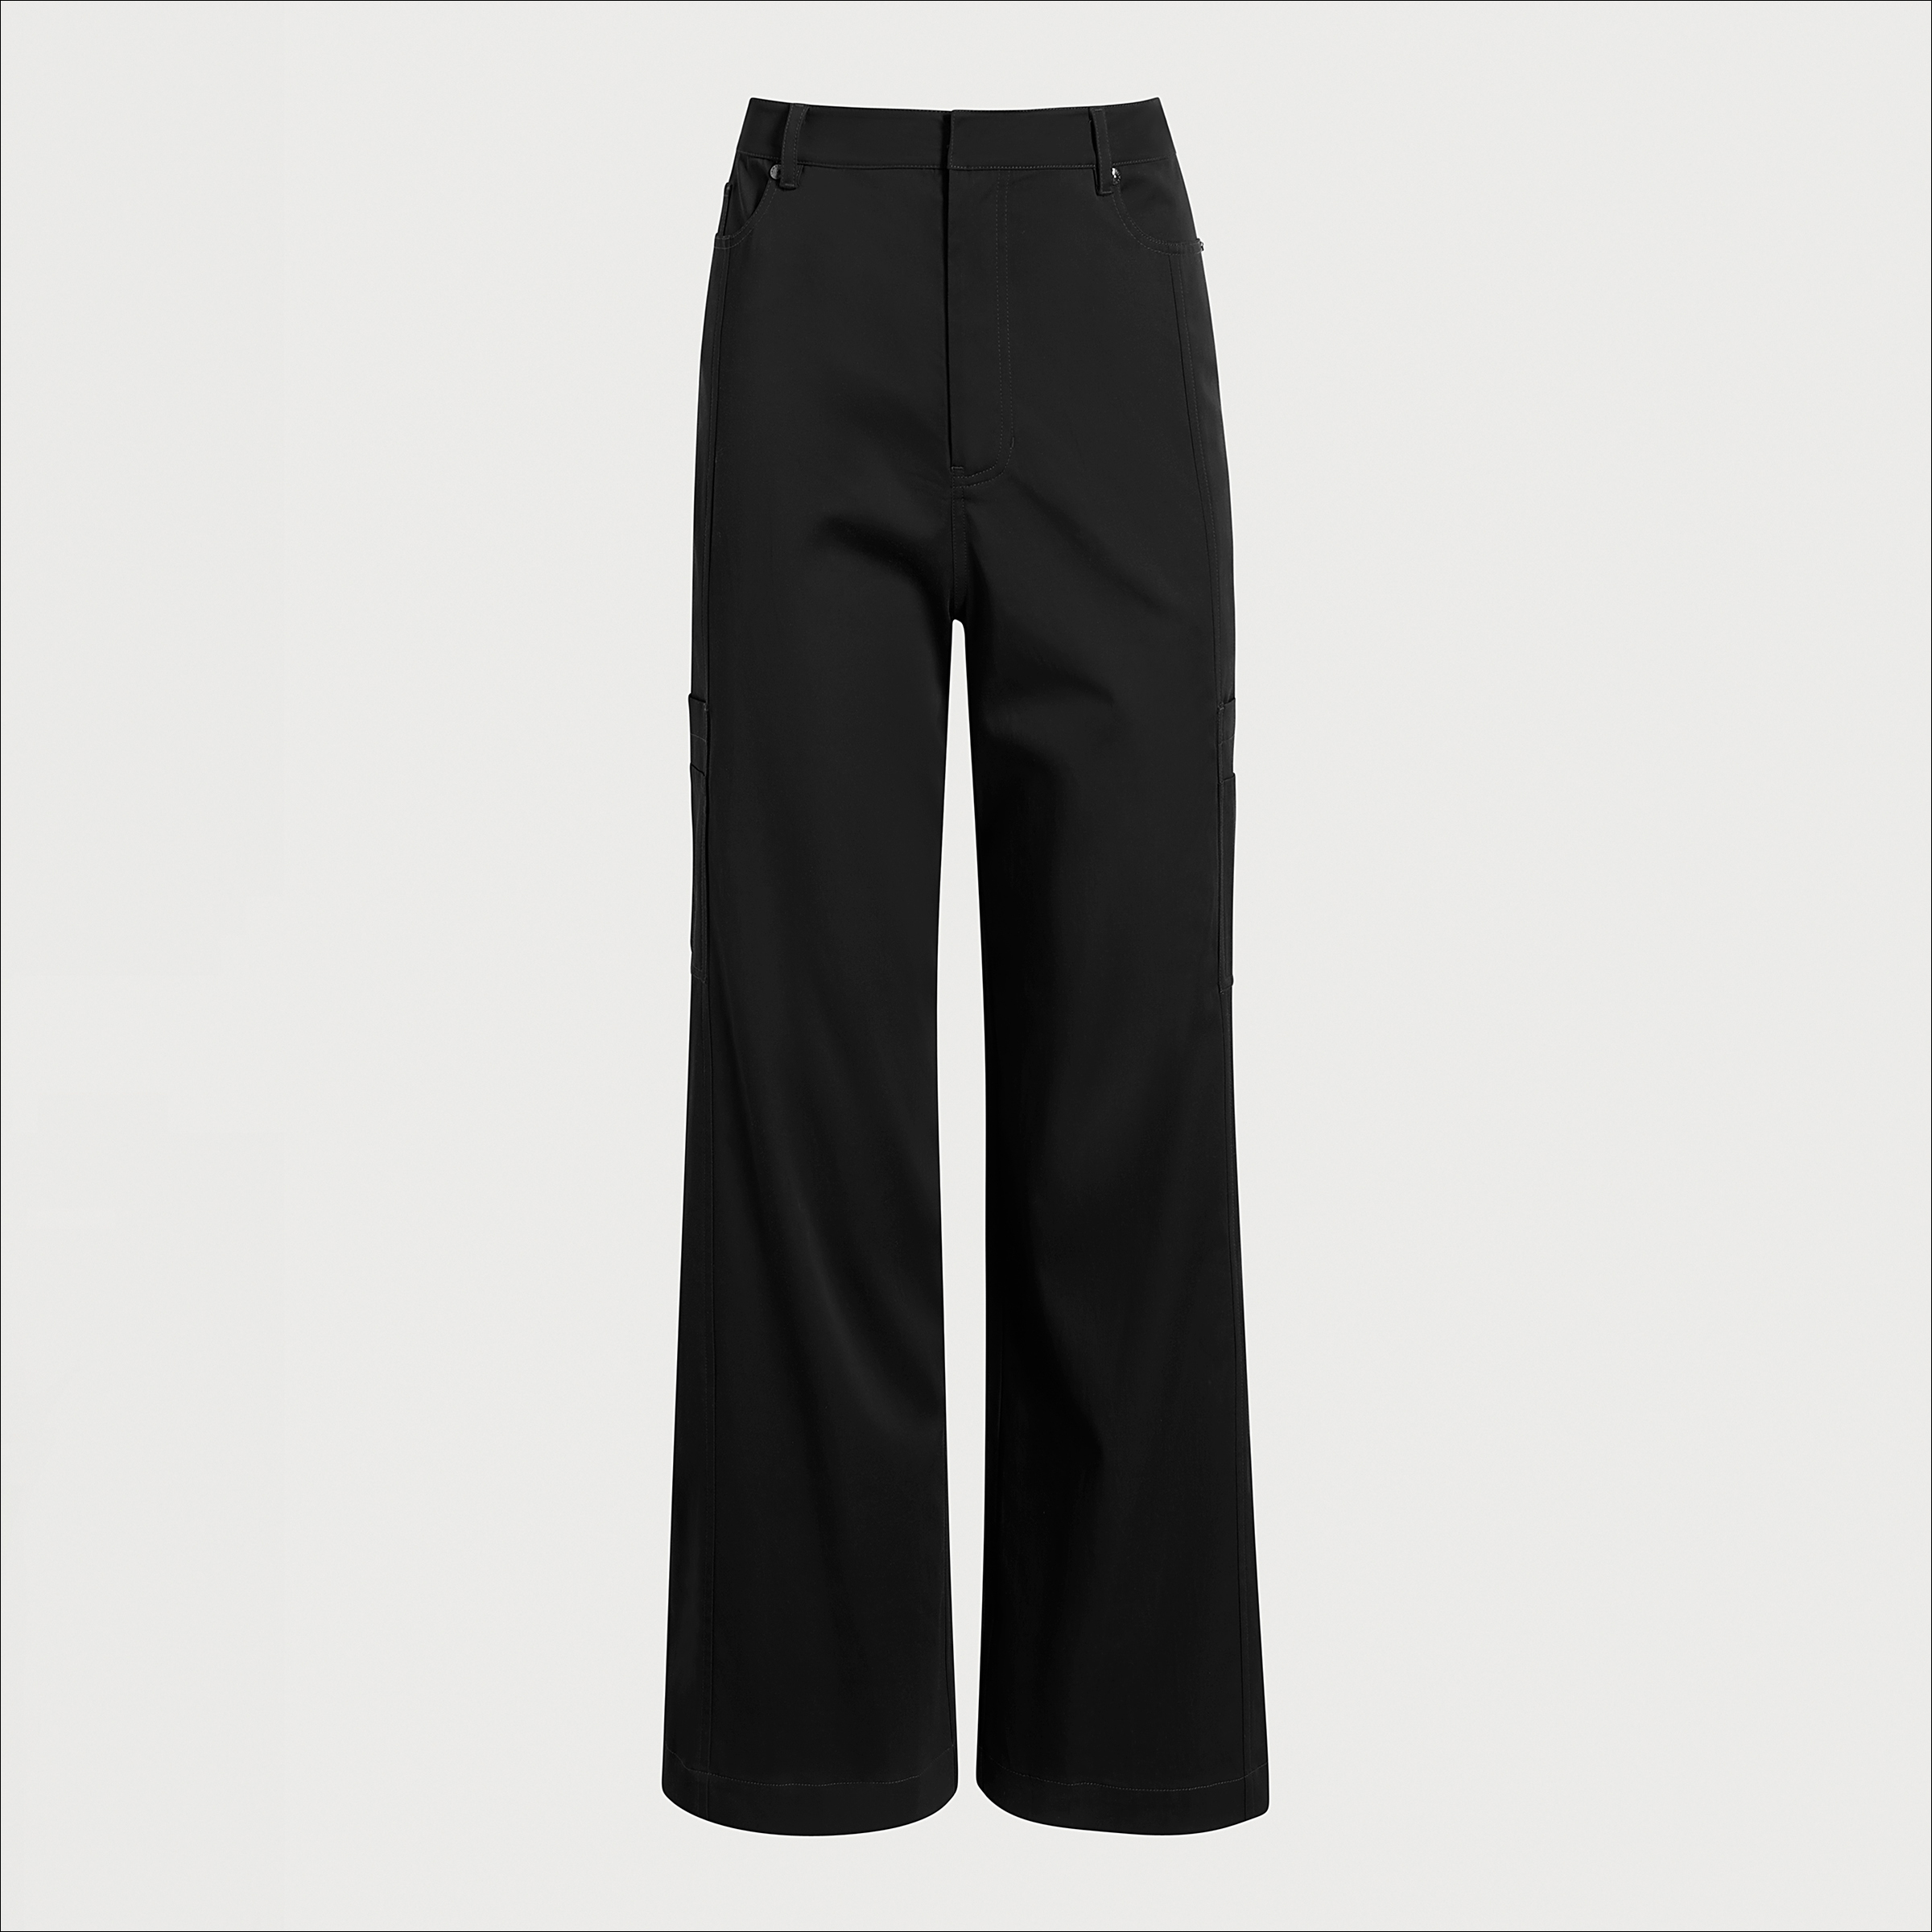 High waist black trousers, Designer Collection, Coveti